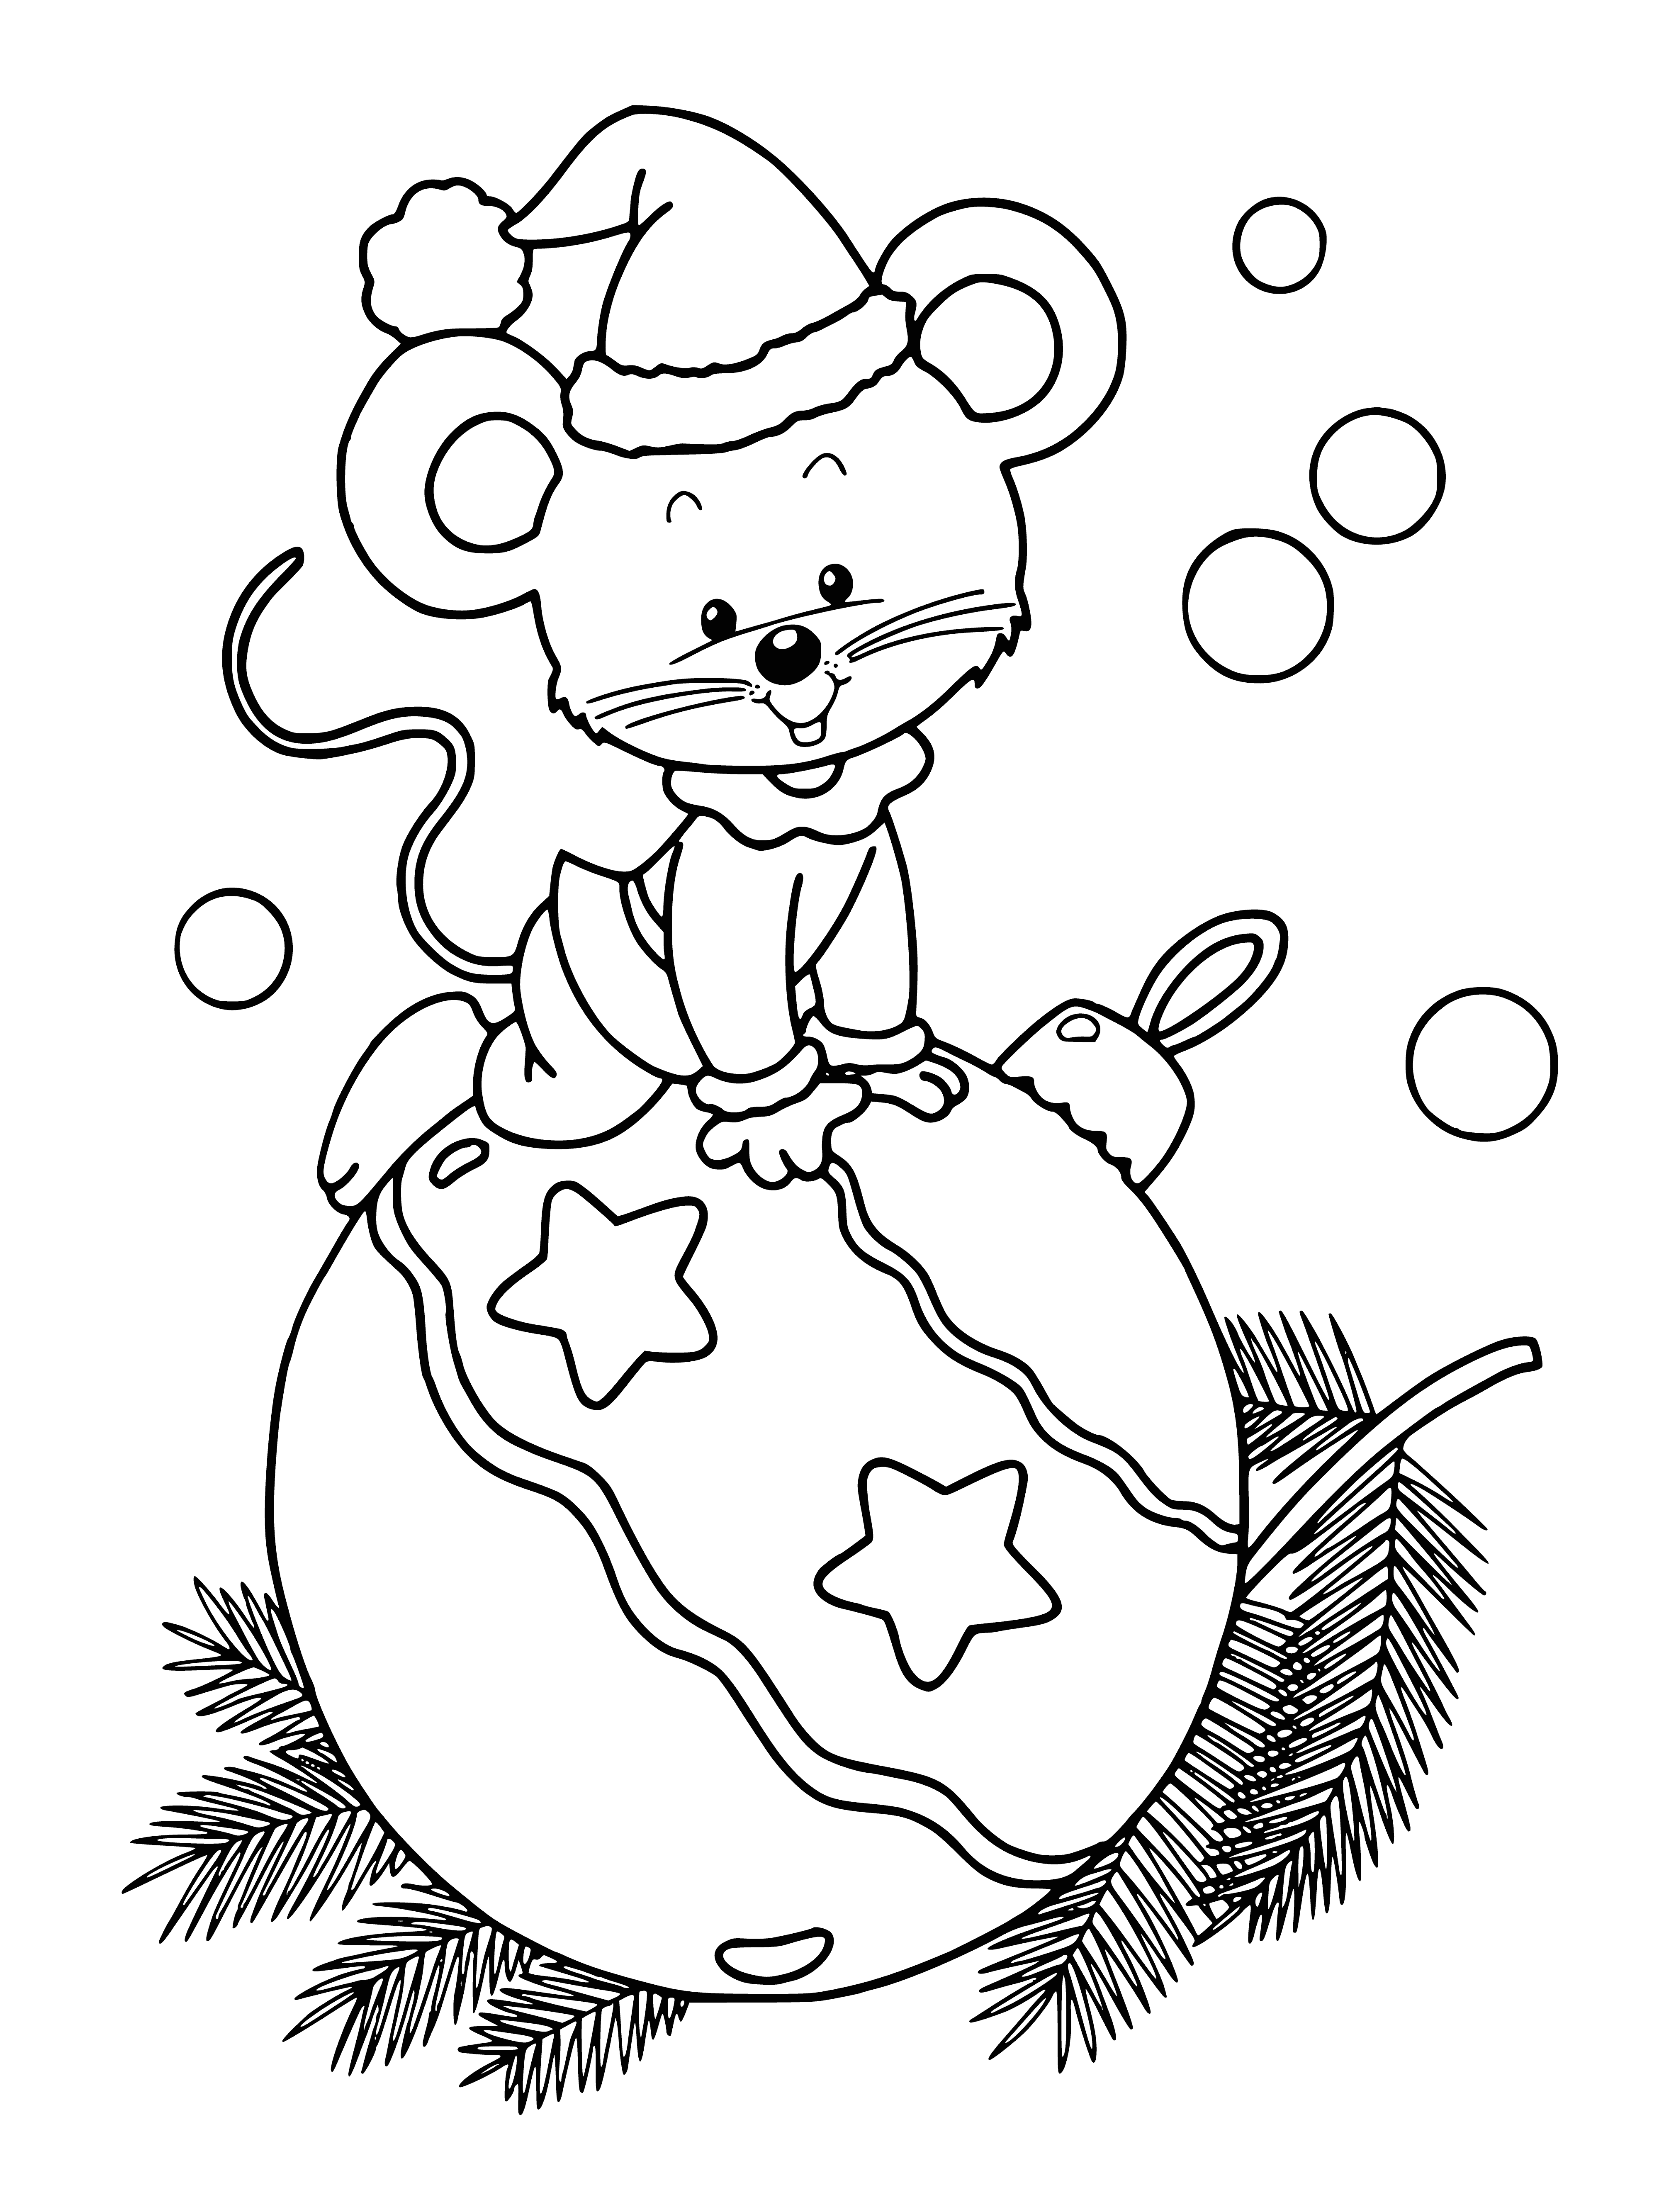 coloring page: A rat crawls on a light brown Christmas ball, holding a piece of cheese in its mouth. Small black eyes, a pink nose, and long thin whiskers.